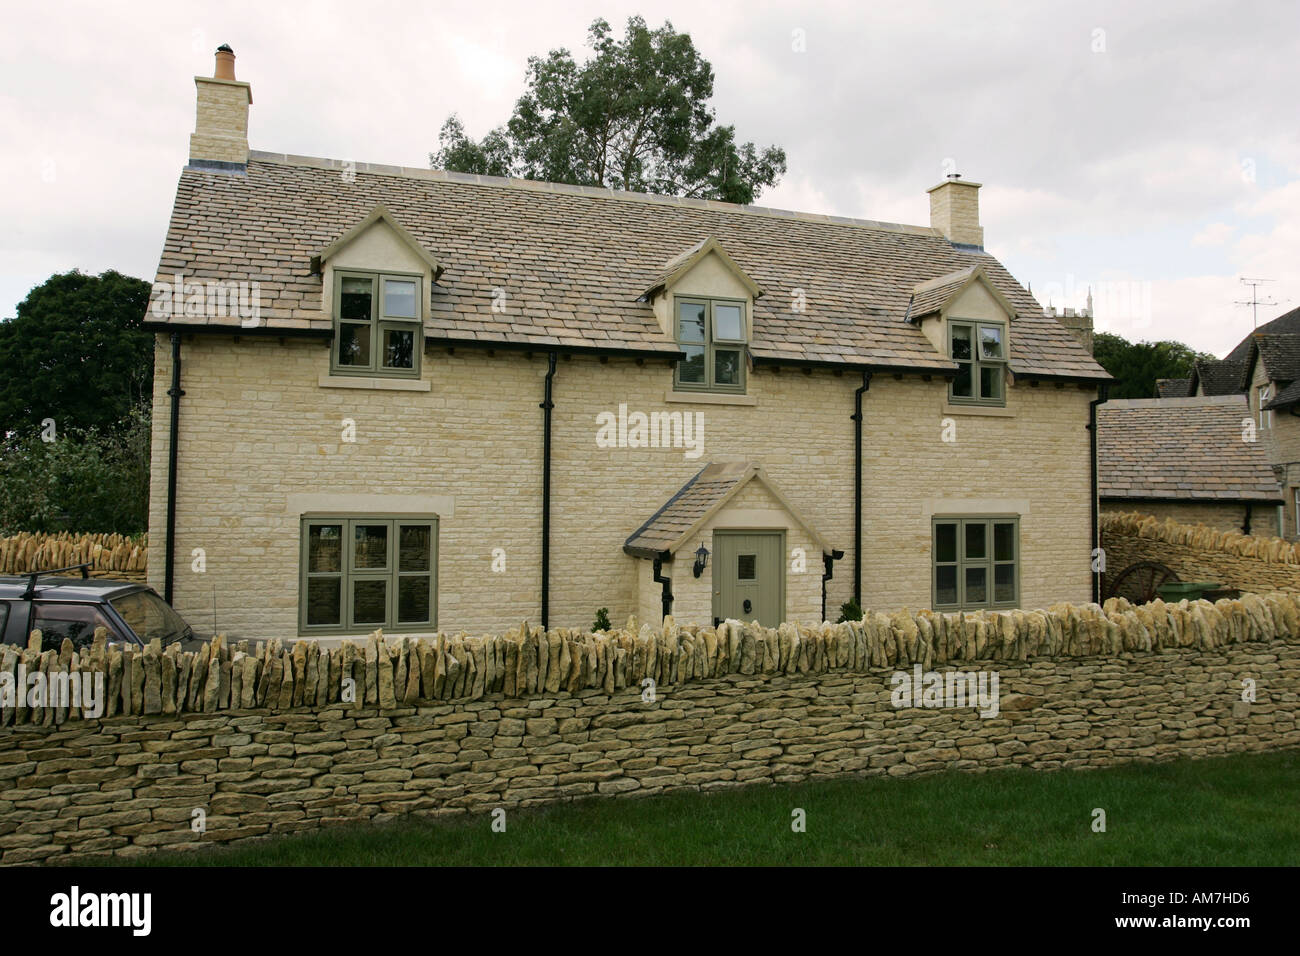 Typical newly built detached Oolitic limestone Cotswold family house cottage home the Cotswolds Southern England UK GB Britain Stock Photo